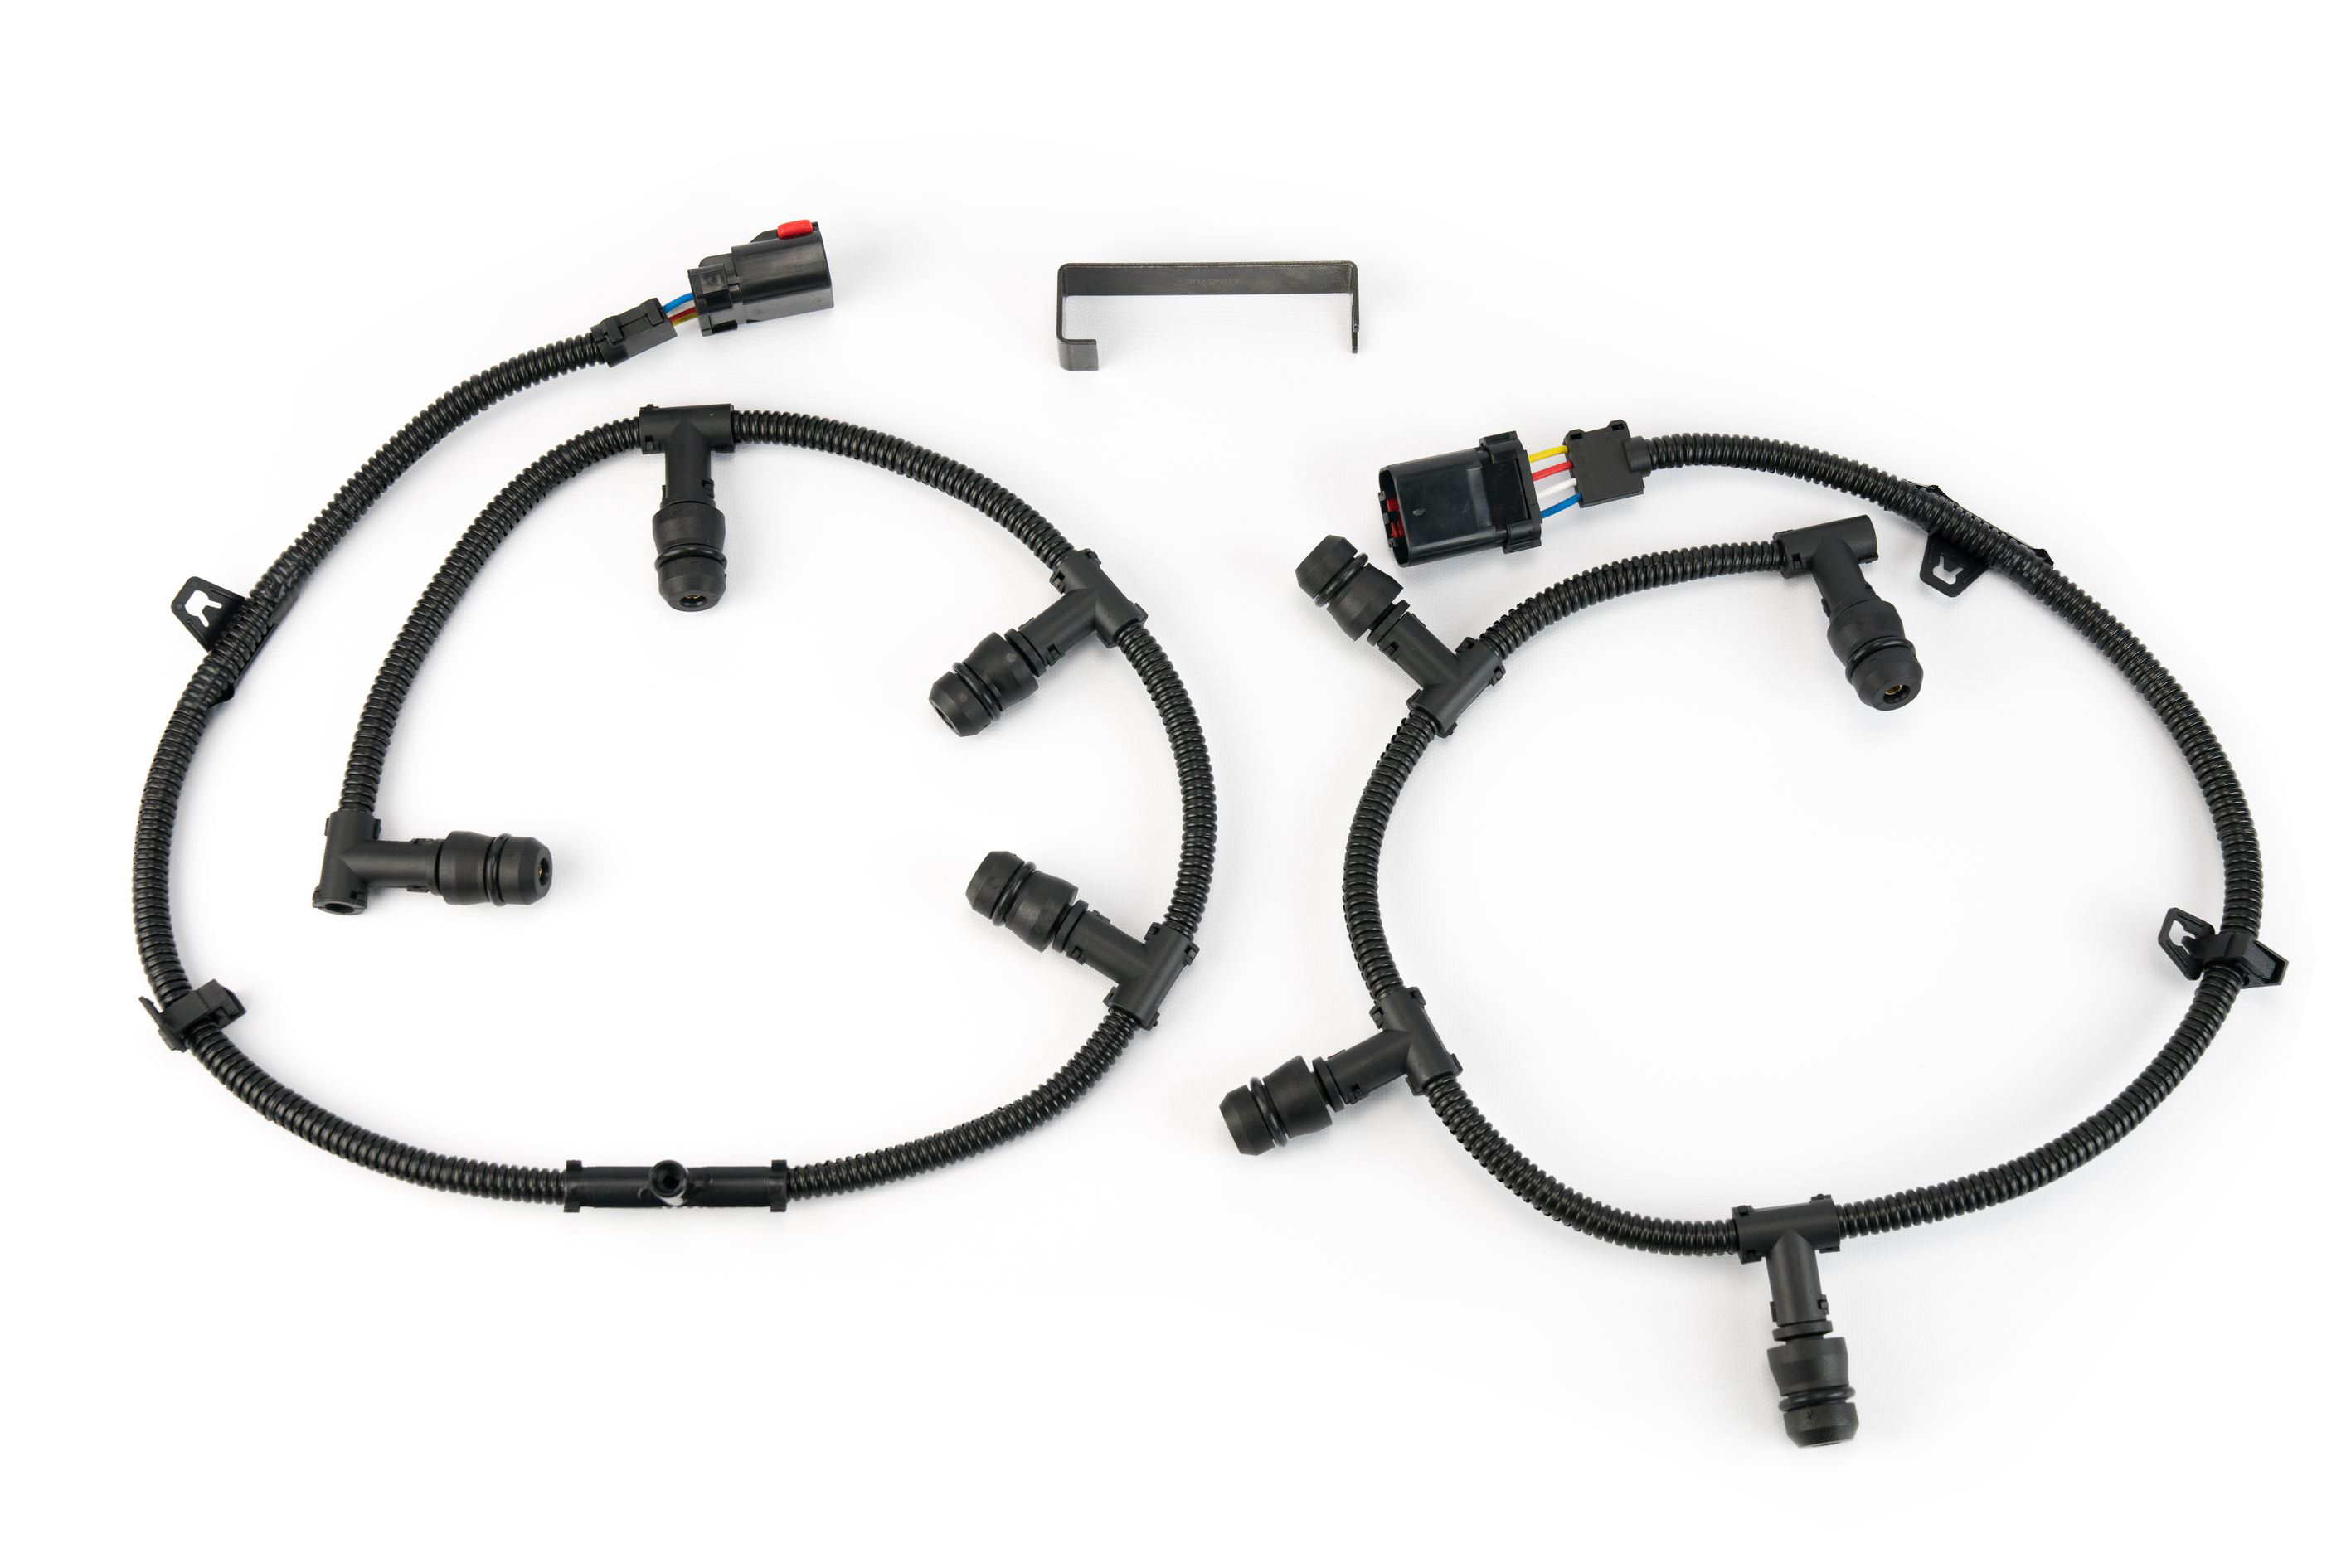 Ford Powerstroke 6.0 Glow Plug Harness Kit - Includes Right, Left Harness, & Removal Tool - Ford F250 Super Duty, F350, & more - 2004, 2005, 2006, 2007, 2008, 2009, 2010 Image